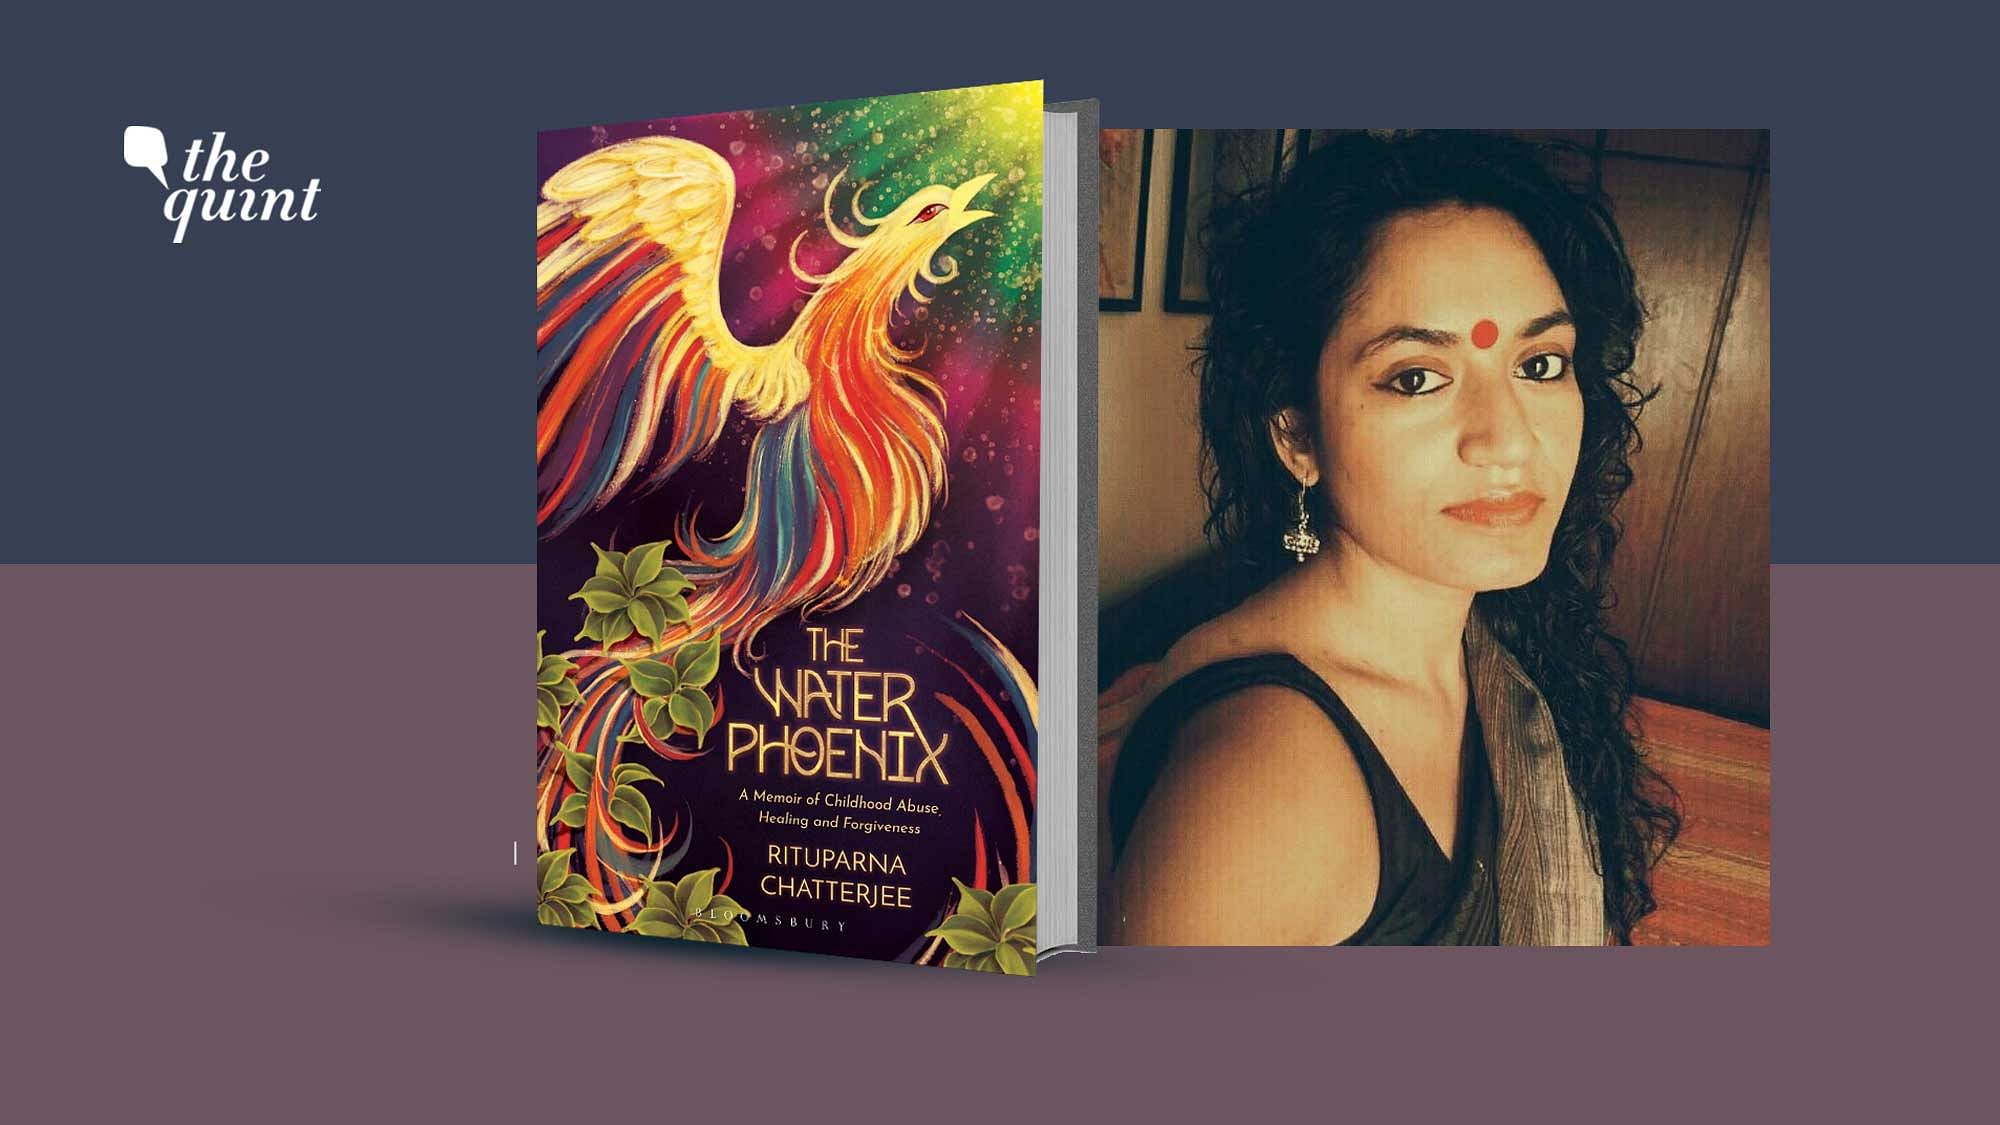 Image of author Rituparna Chatterjee and the cover of her memoir ‘The Water Phoenix’, used for representational purposes.